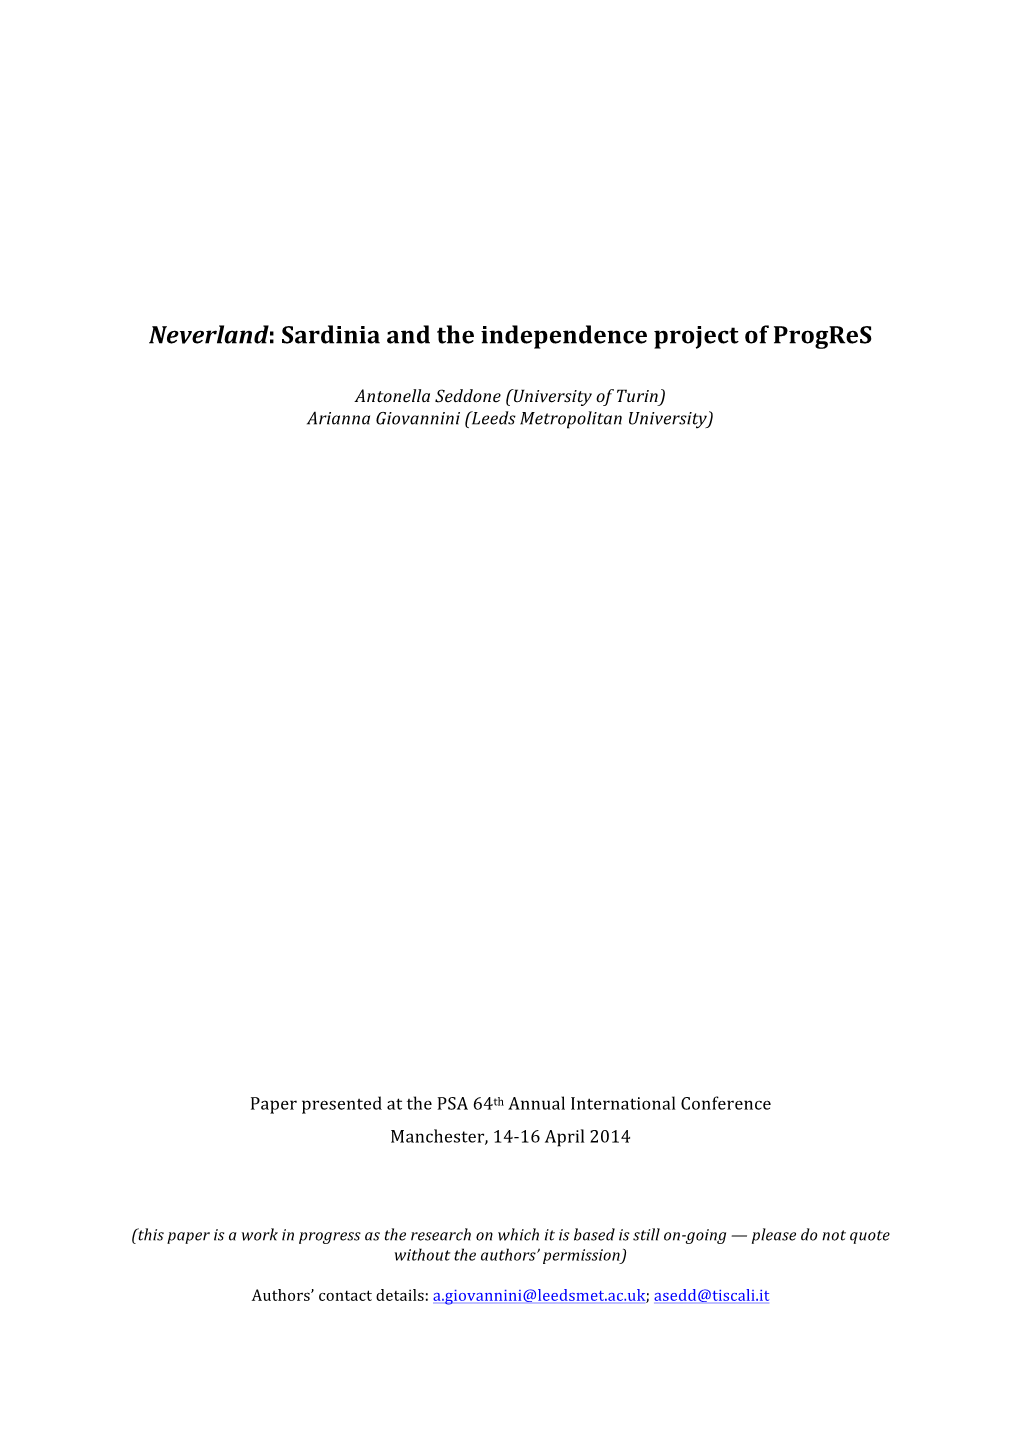 Neverland: Sardinia and the Independence Project of Progres